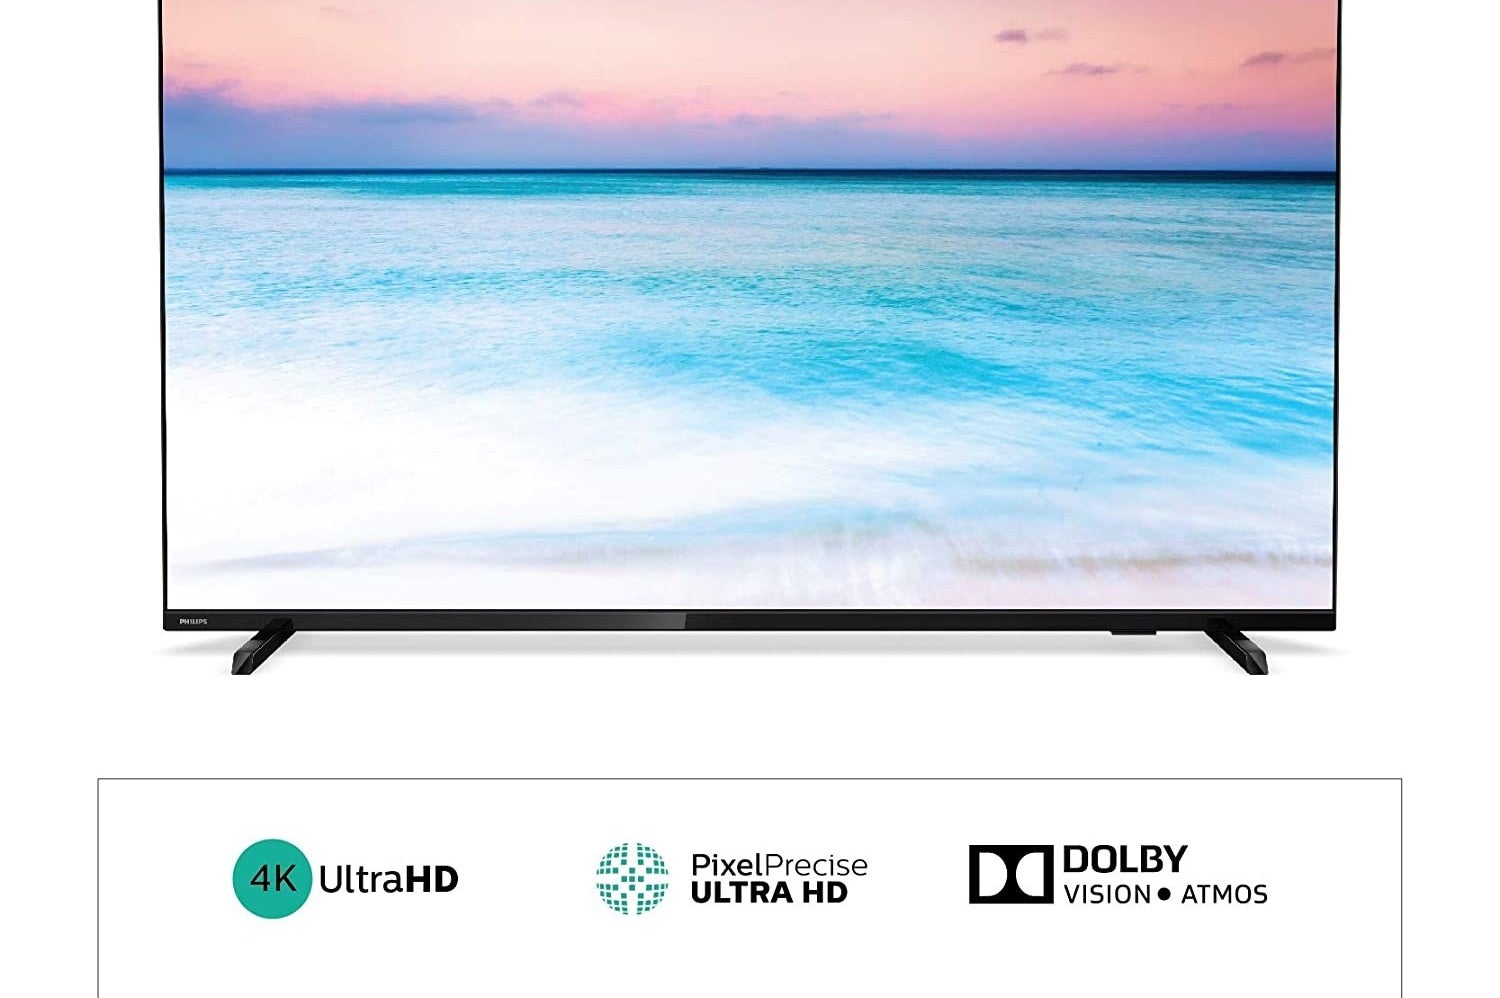 A Philips 6600 Series 4K Ultra HD LED Smart TV in black.